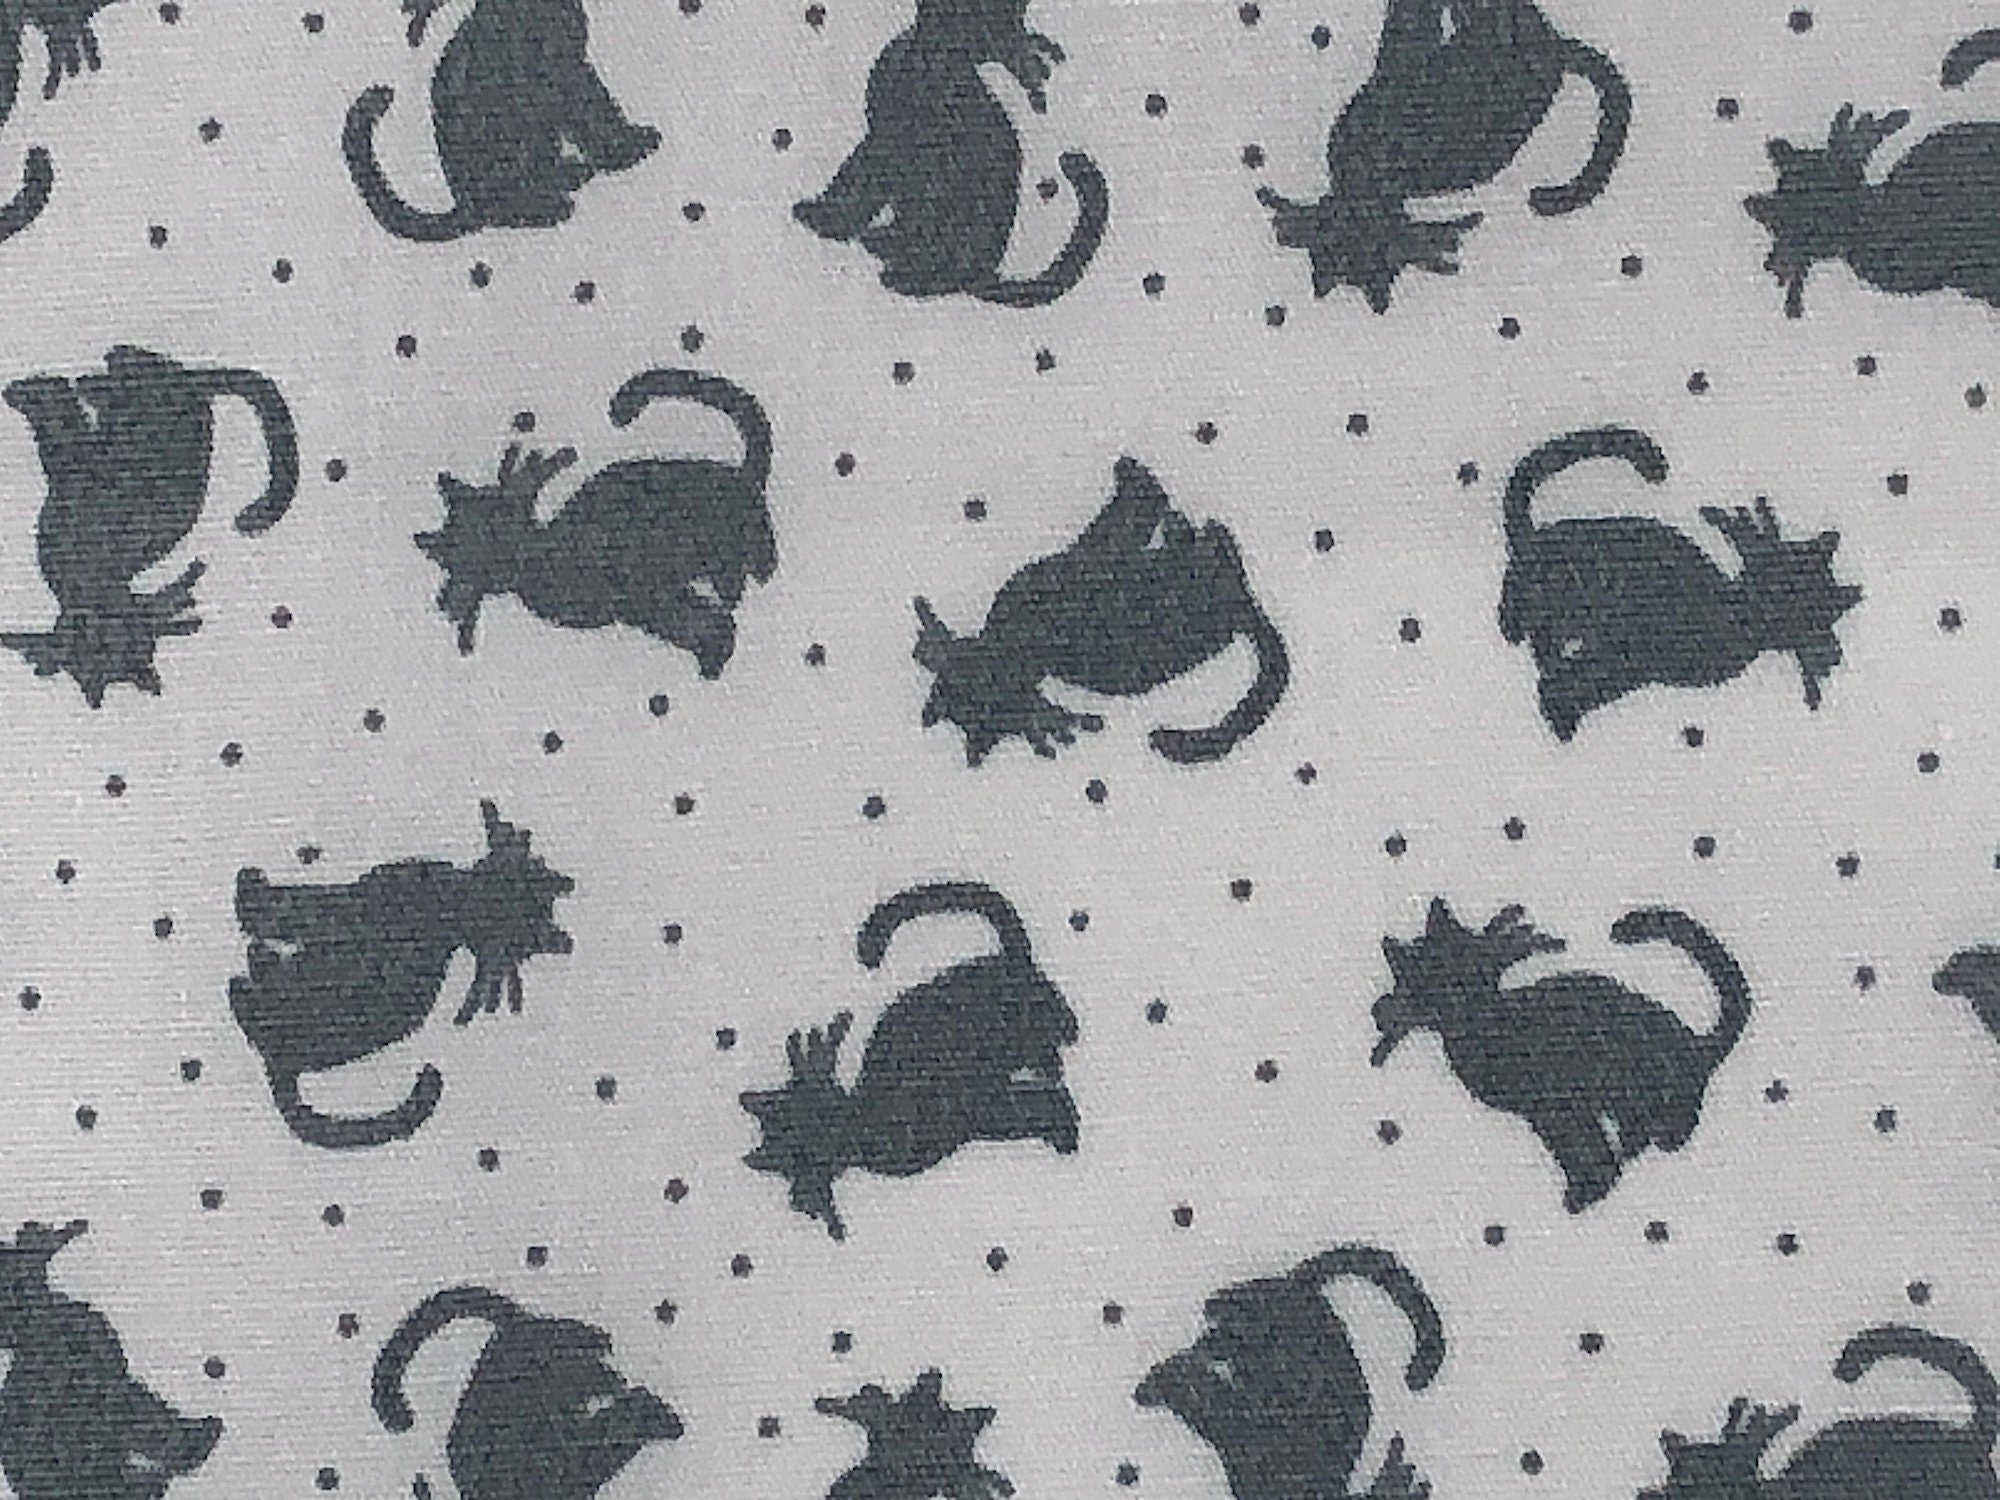 This fabric is called Tonal Cats White/Gray and is part of the Better Basics Collection. This fabric has gray cats on a white background which is also covered with small gray dots.